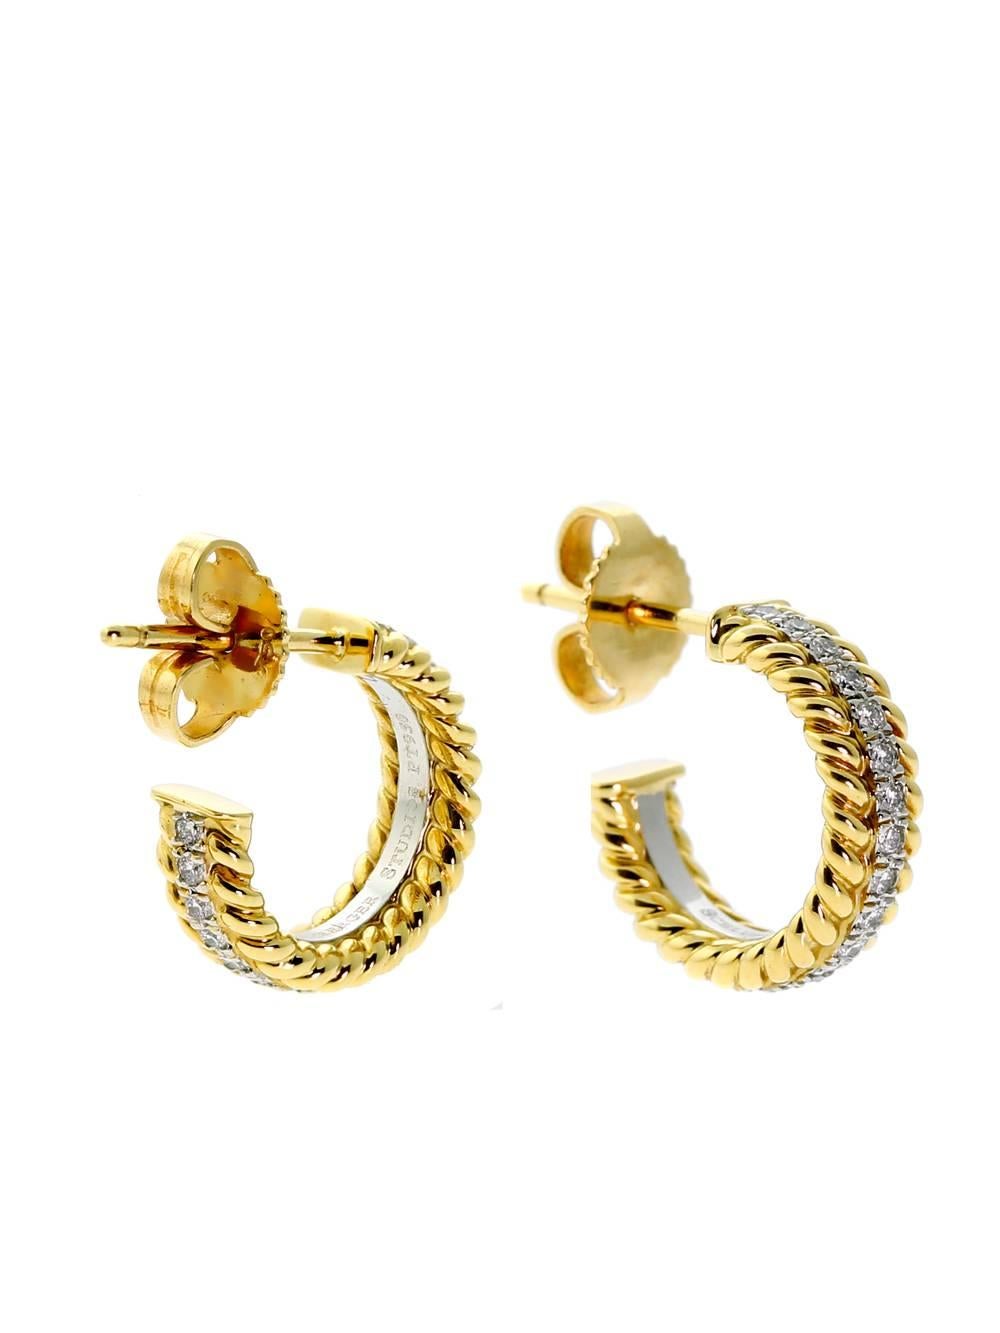 A stunning authentic pair of Tiffany & Co Schlumberger diamond earrings set in platinum bordered with elegant twisted 18k yellow gold ropes.

Diamonds: .60ct Vs1 E-F Color Round Brilliant Cut Diamonds

Dimensions: 13.5mm in circumference (.53